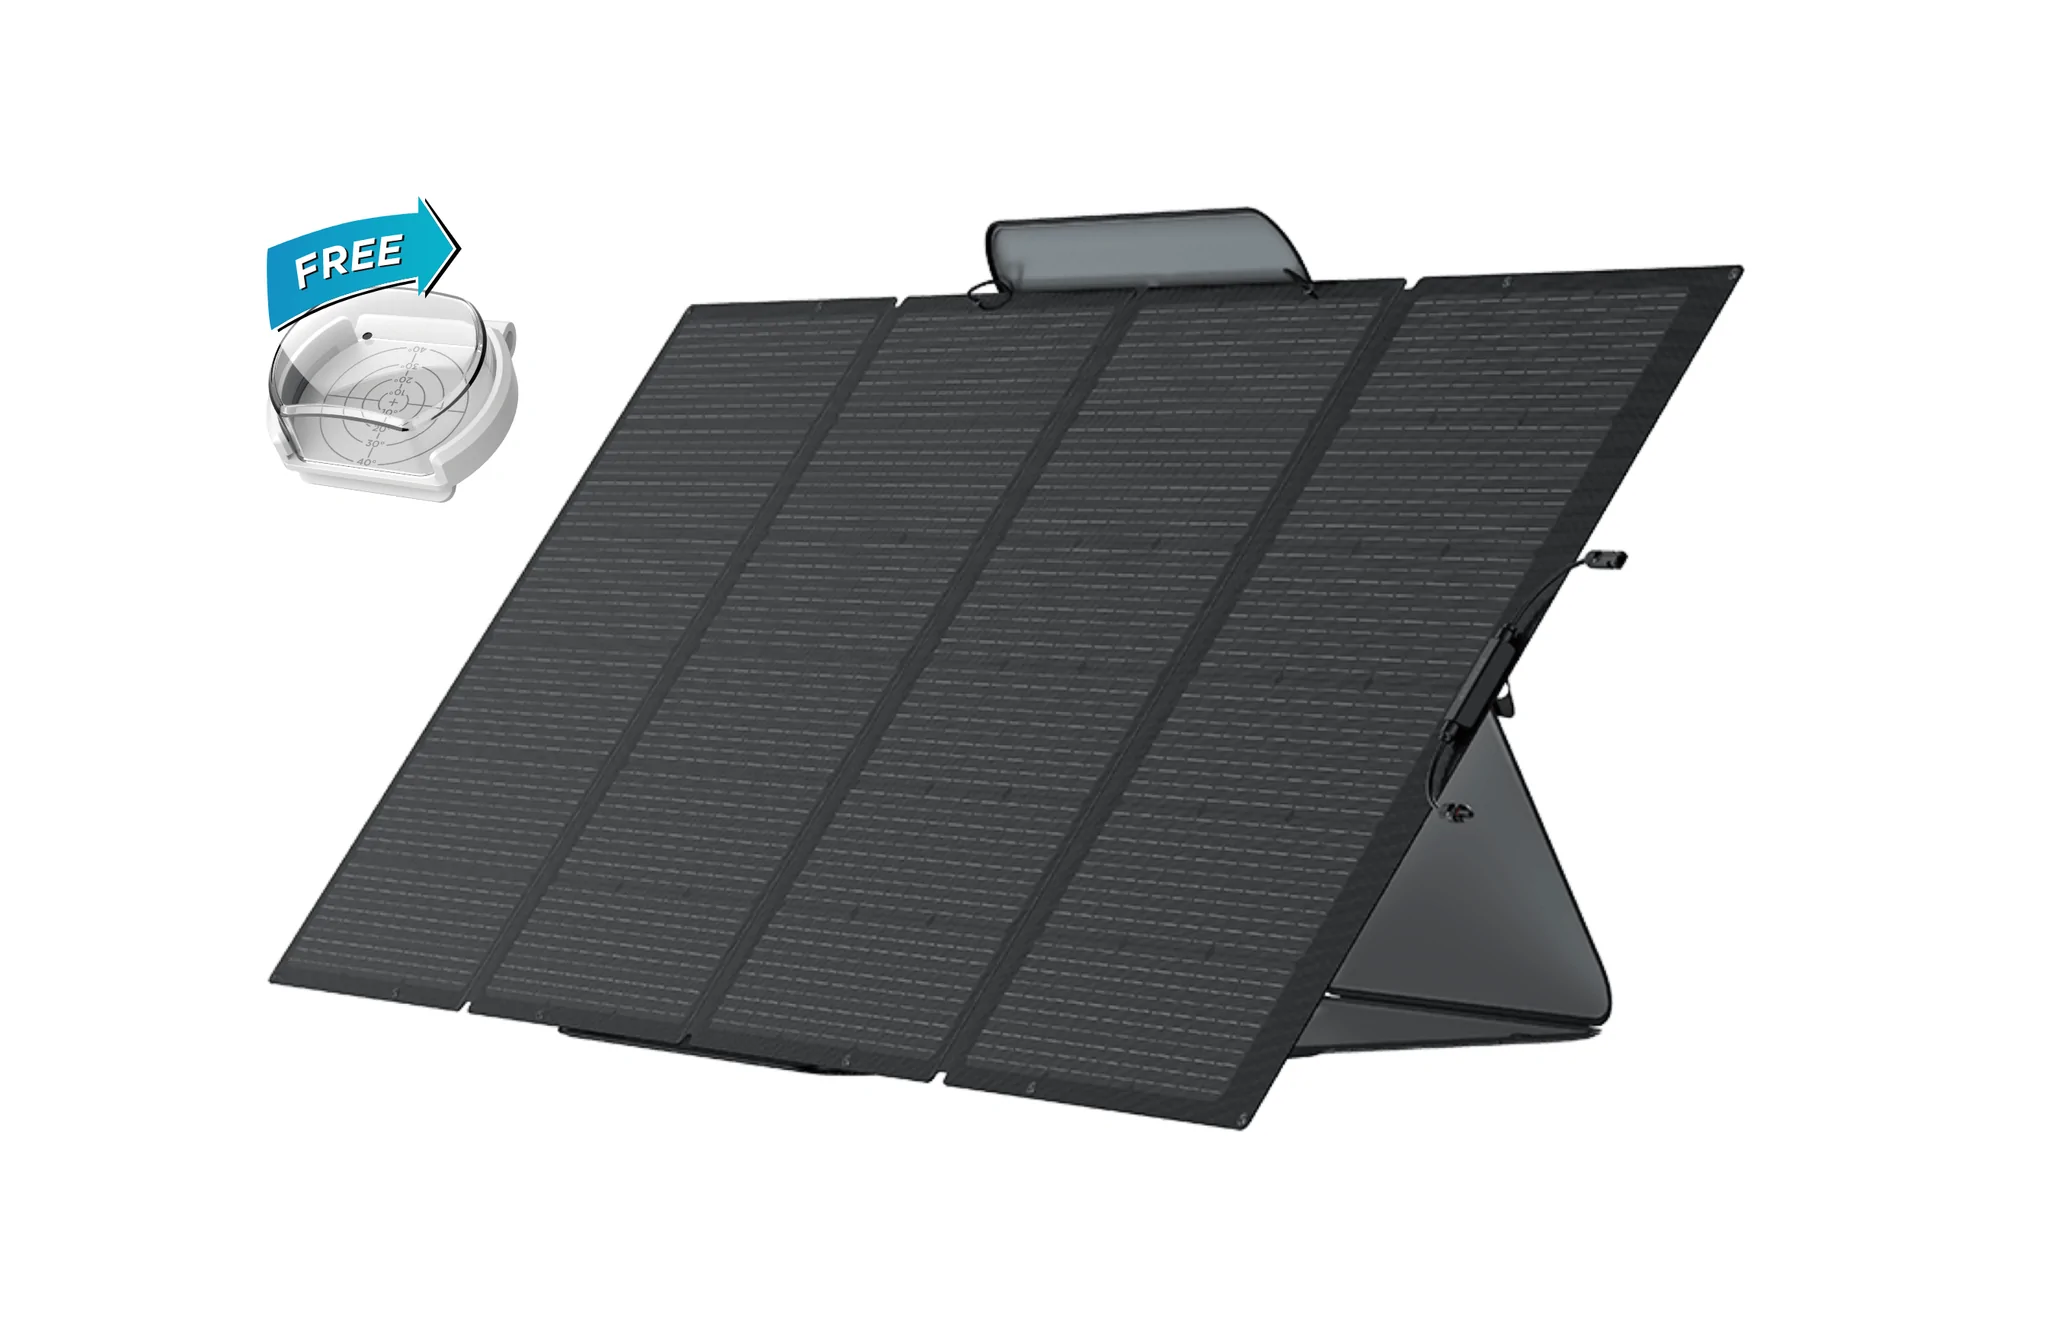 A Portable Solar Panel from EcoFlow, with 400W output, displayed on a white background.